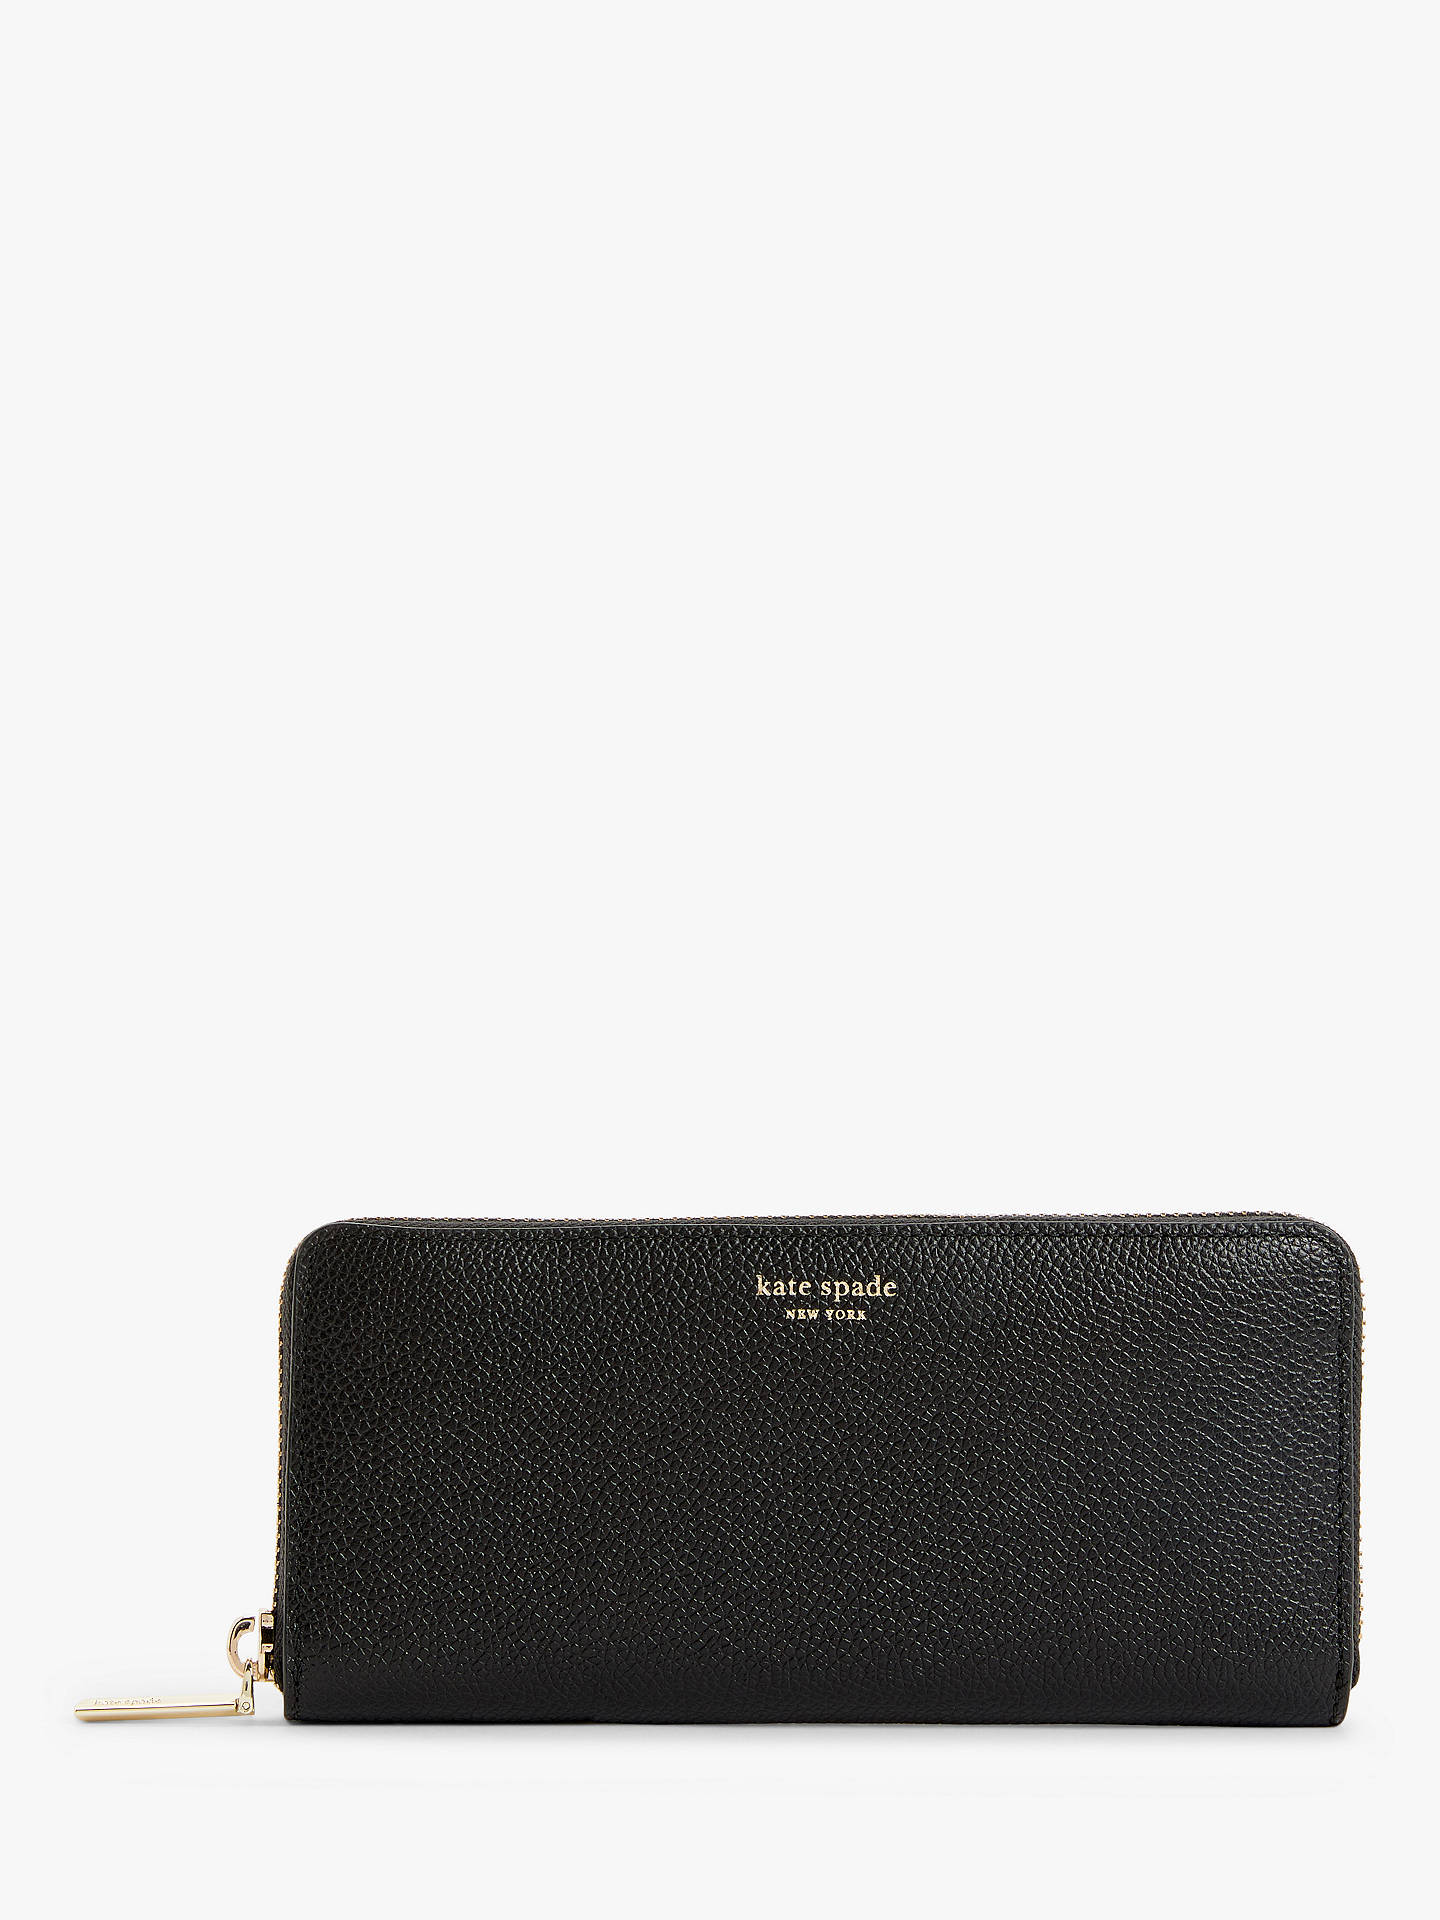 kate spade new york Margaux Leather Slim Continental Wallet at John ...